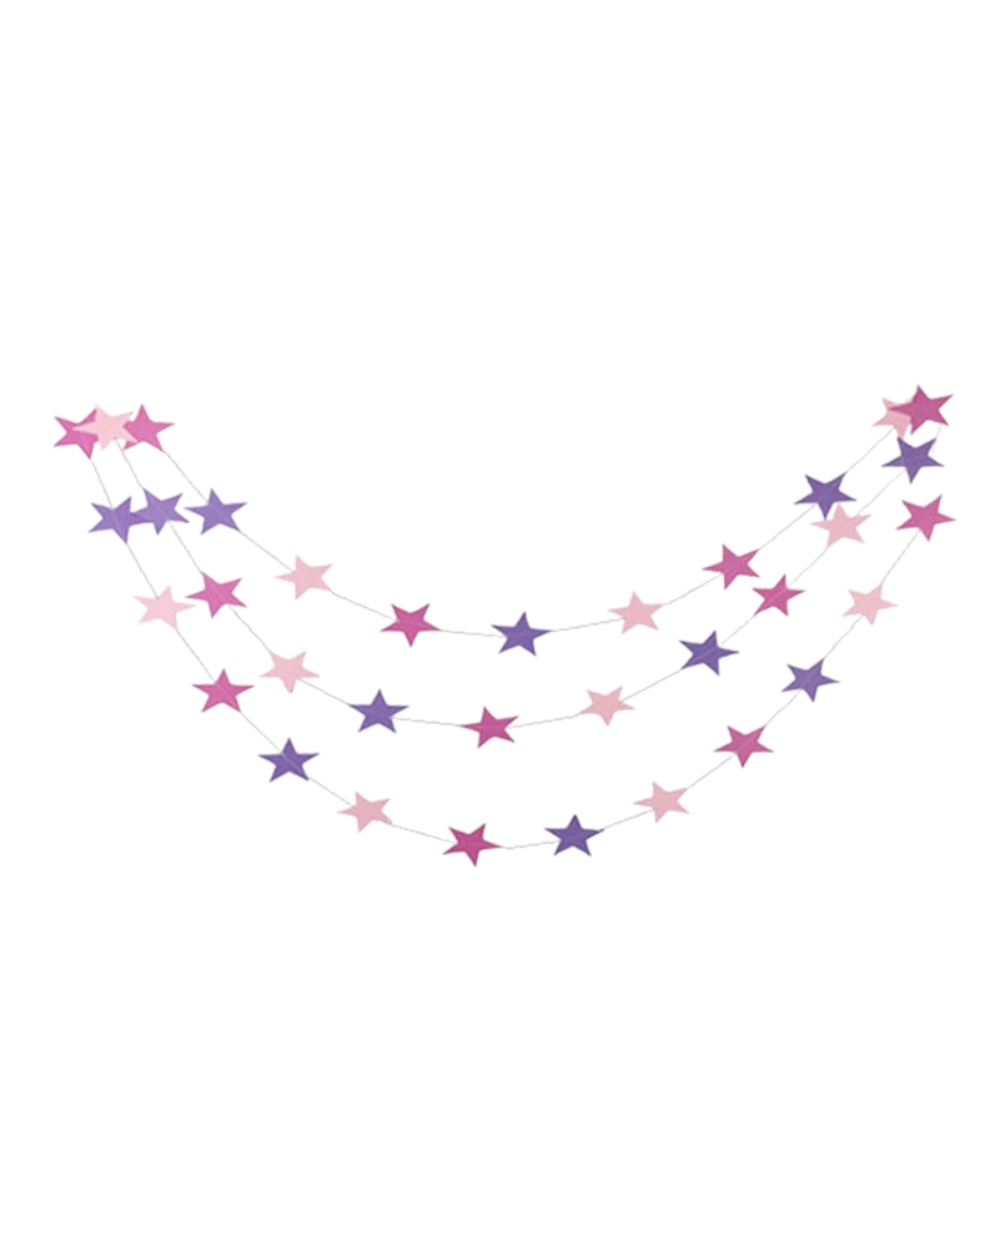 Star banner - Purple, lavender and pink